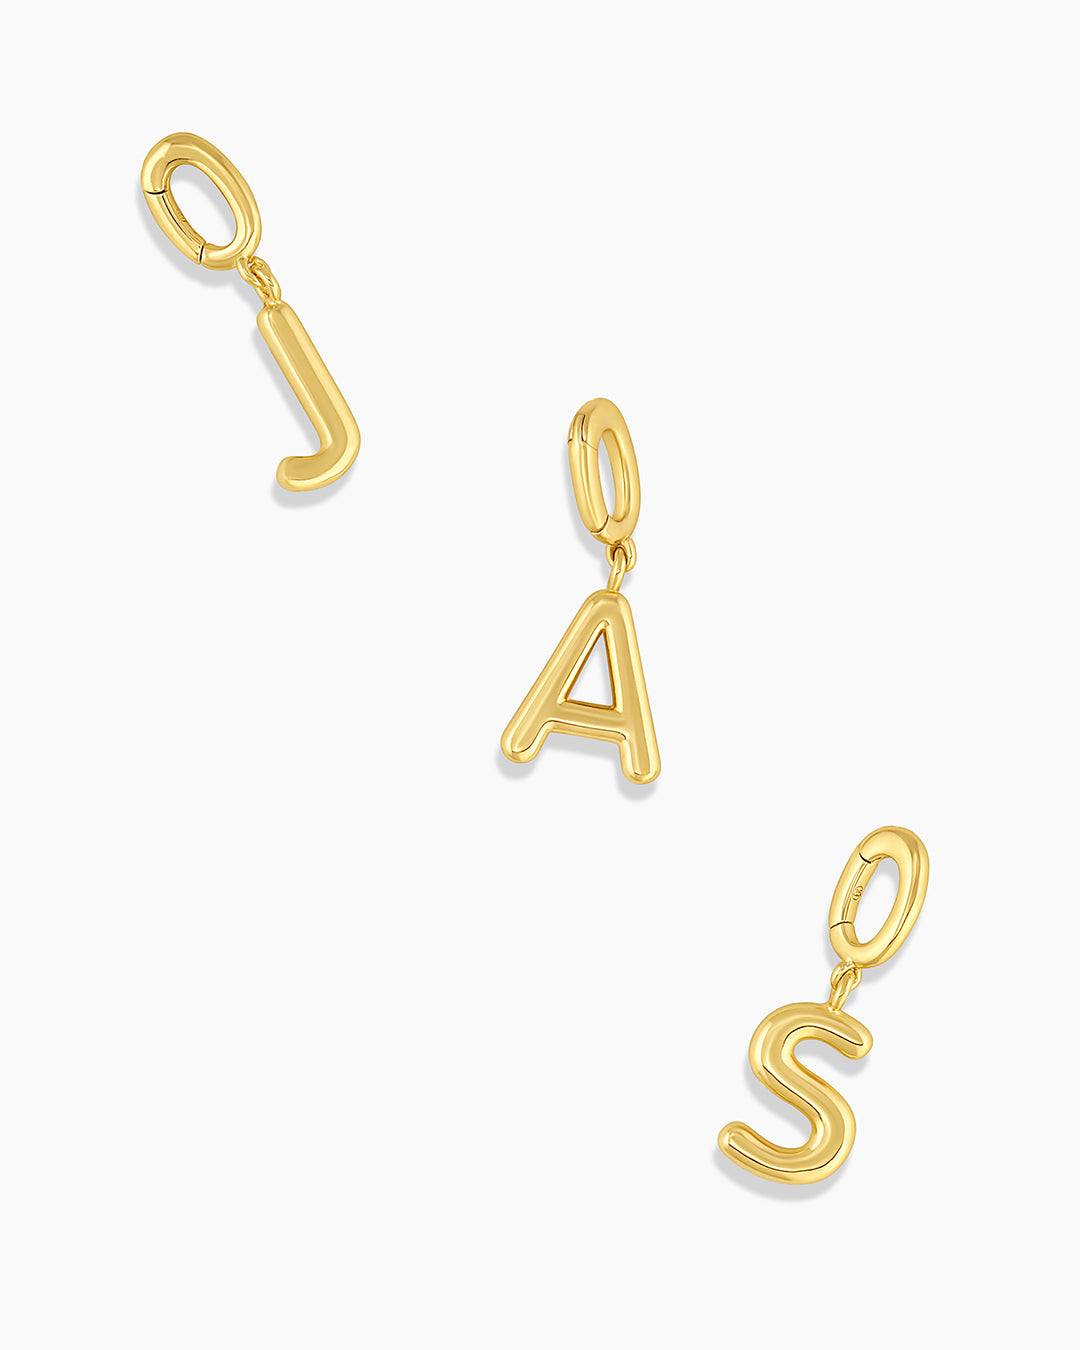 Initial Jewelry: Initial Necklaces, Bracelets & More